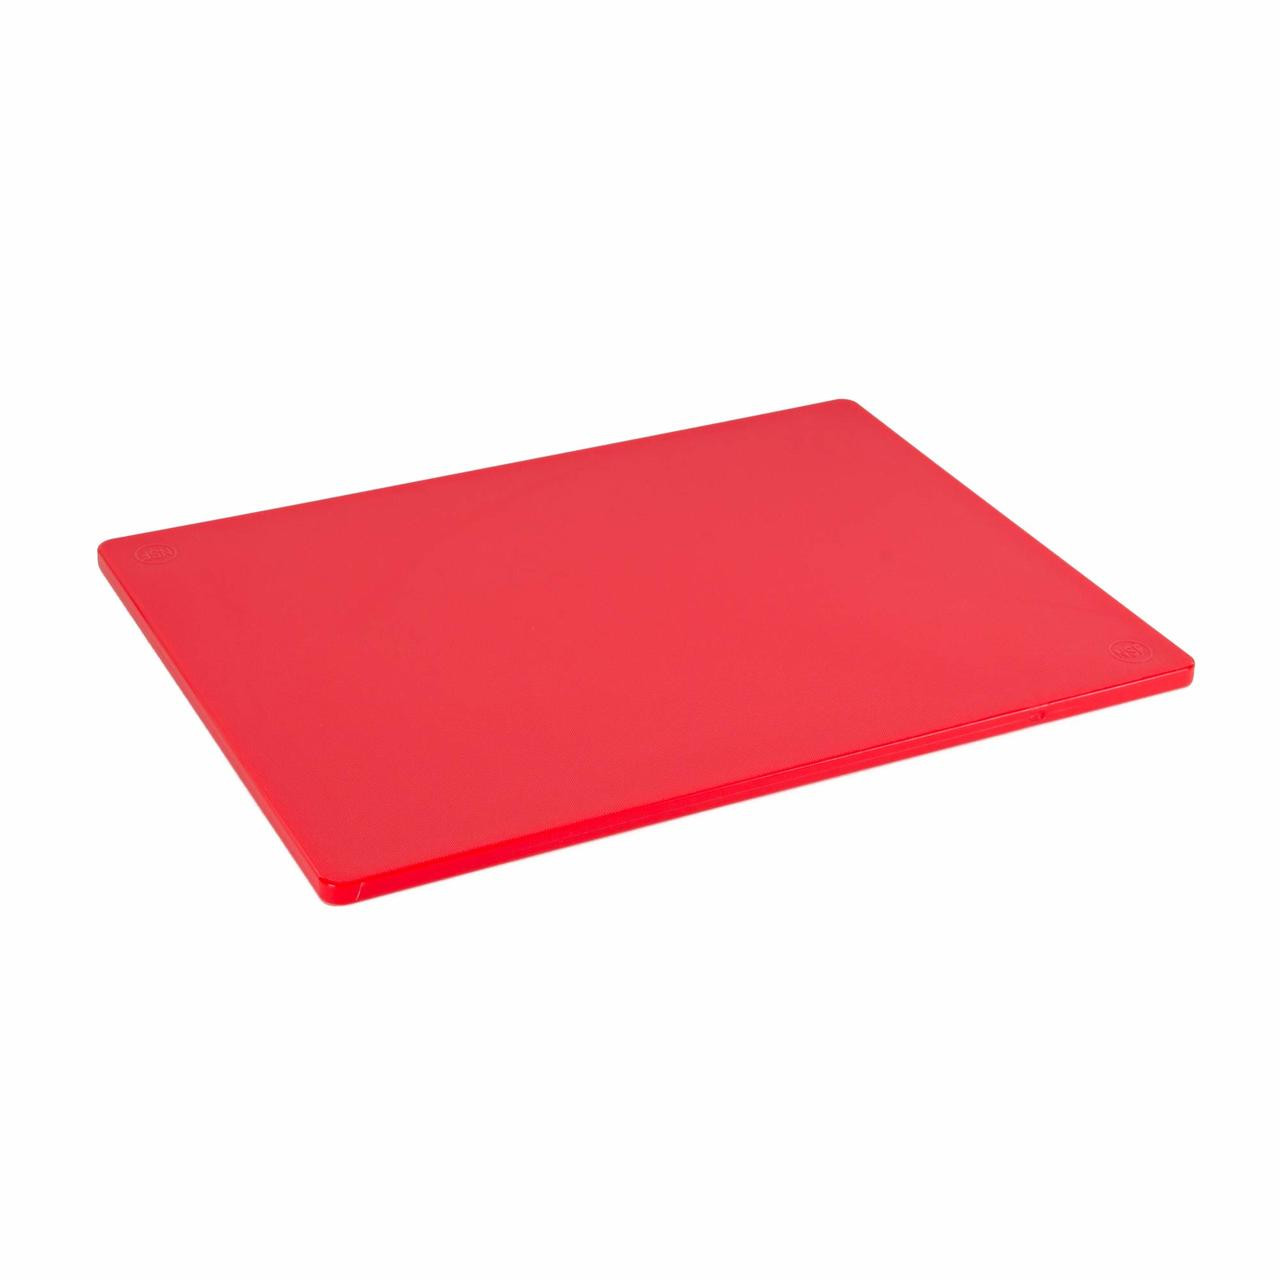 Turbo Air - 30241T0100 Cutting Board - Cutting Board Company - Commercial  Quality Plastic and Richlite Custom Sized Cutting Boards